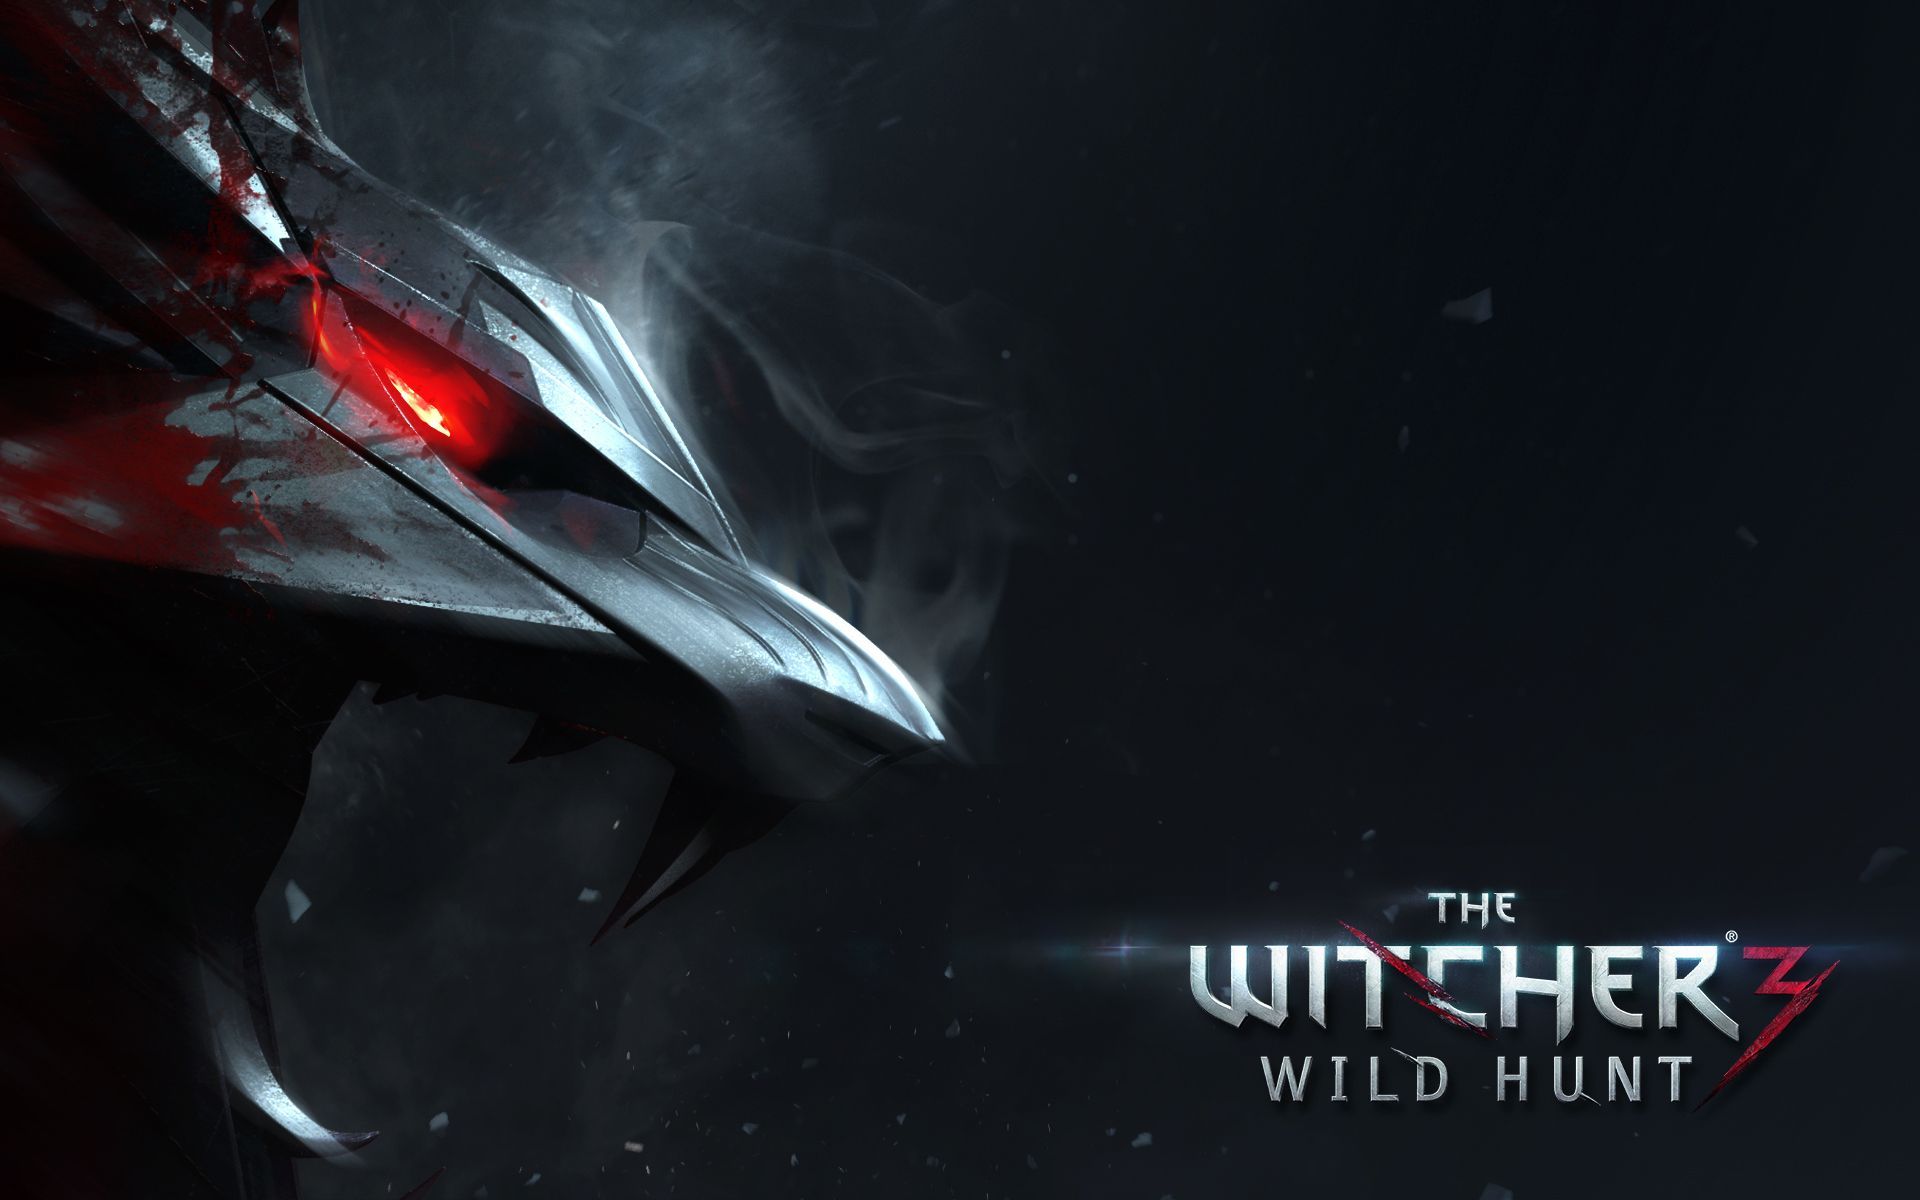 The Witcher 3 Wild Hunt Wallpapers | HD Wallpapers